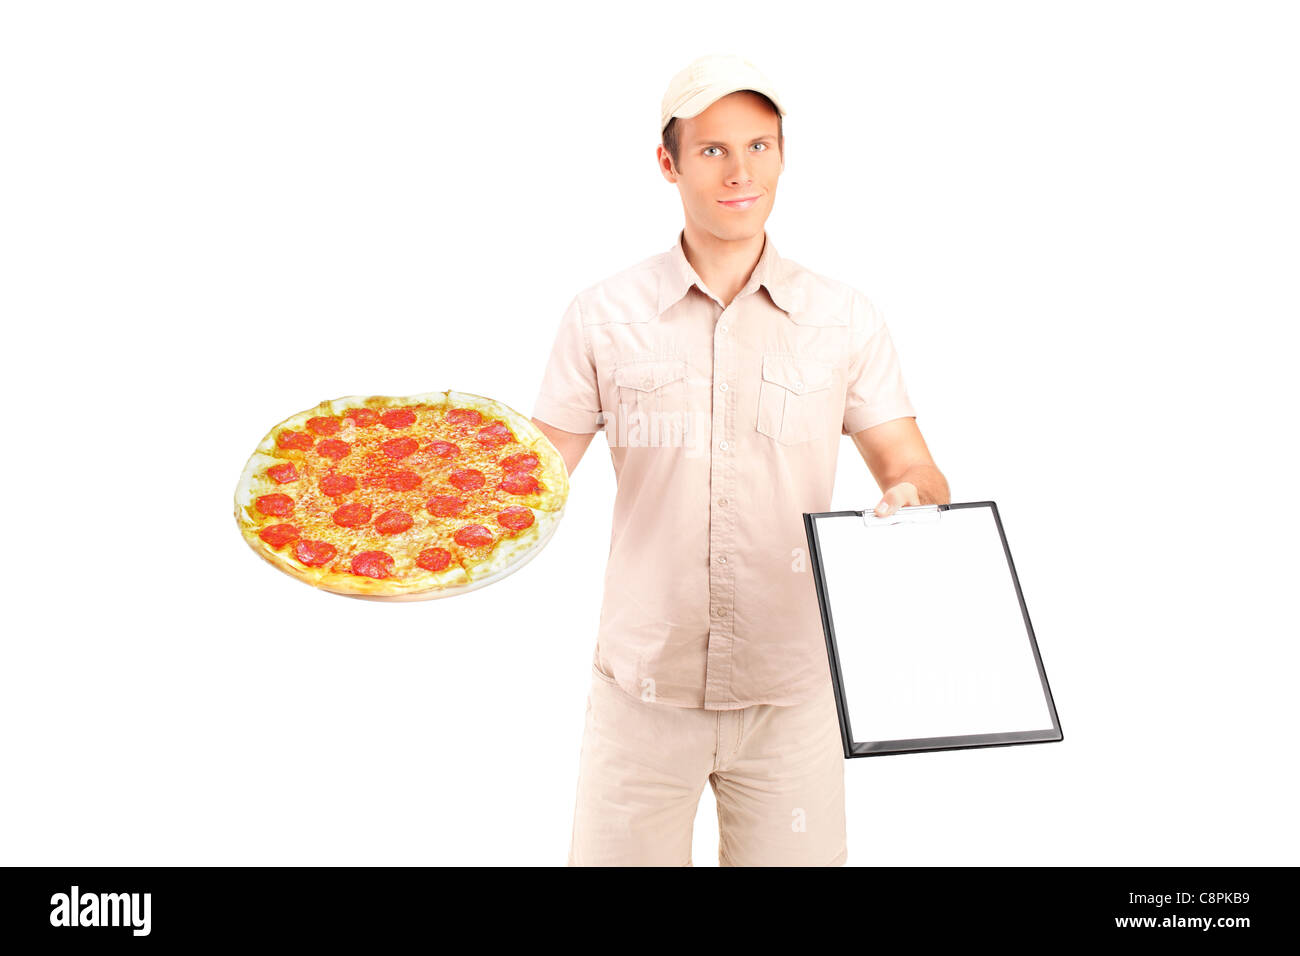 A delivery boy with clipboard delivering a pizza Stock Photo